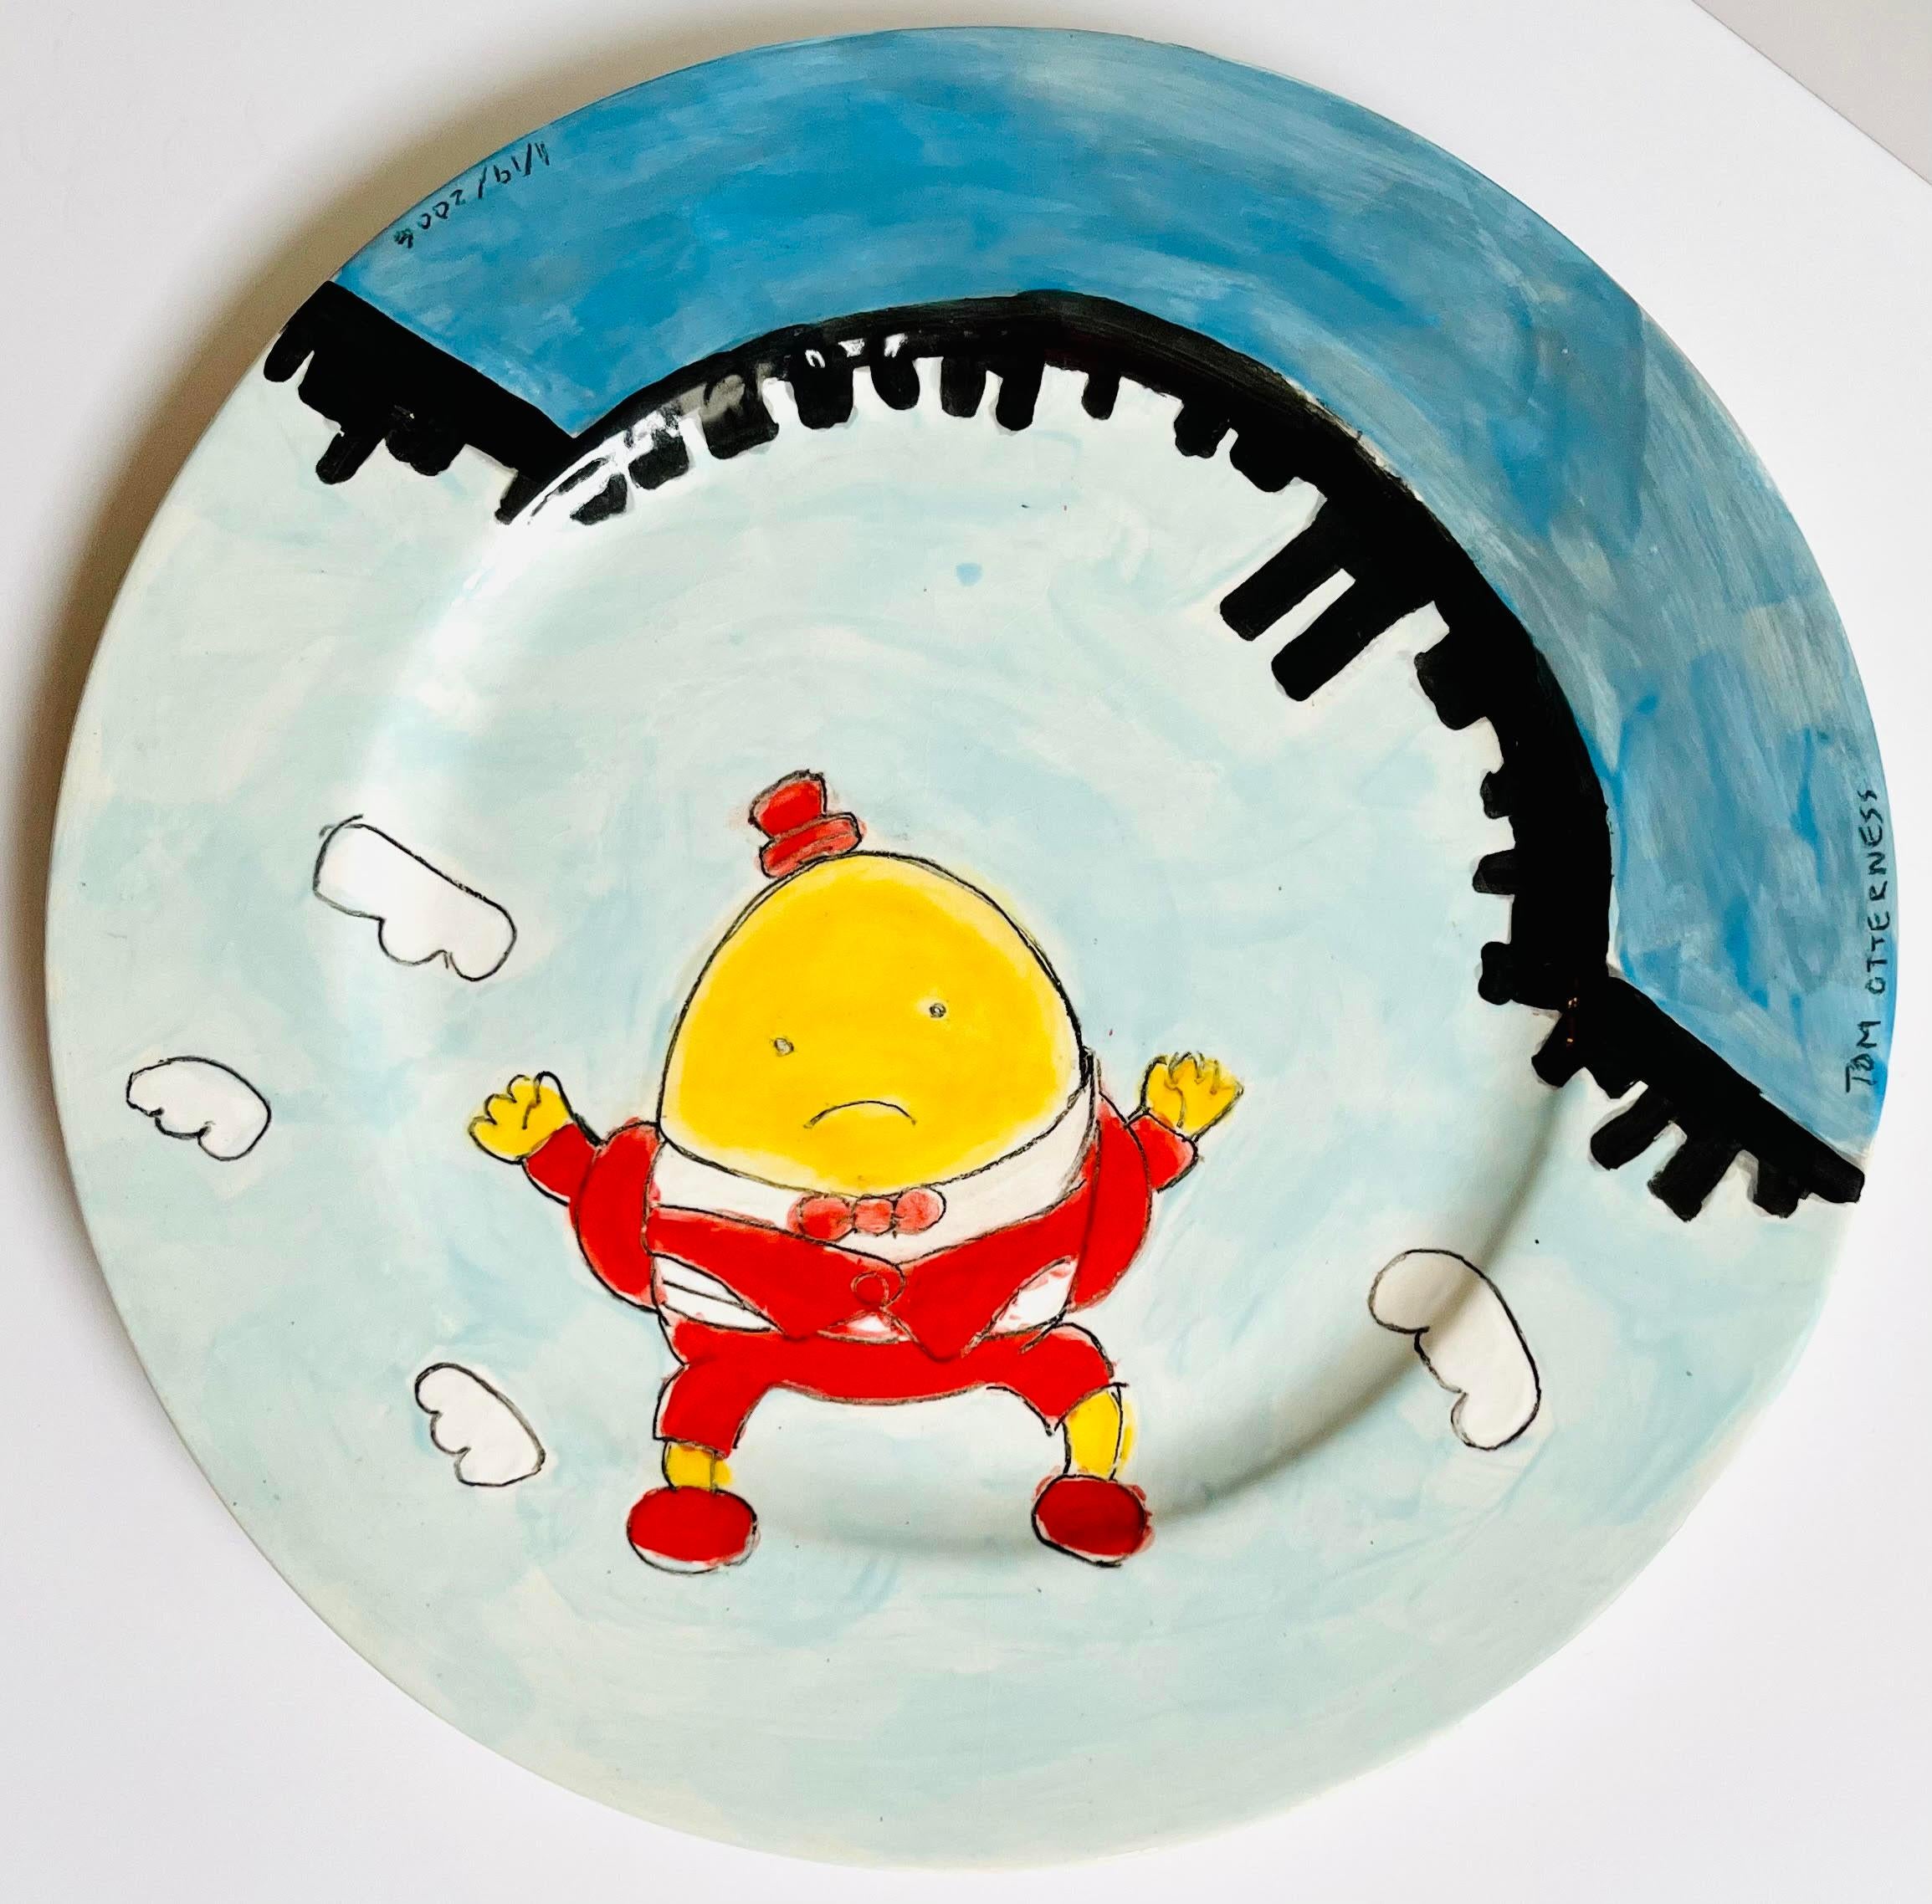 Macy's Humpty Dumpty unique, signed Ceramic Plate by famed sculptor iconic image - Mixed Media Art by Tom Otterness